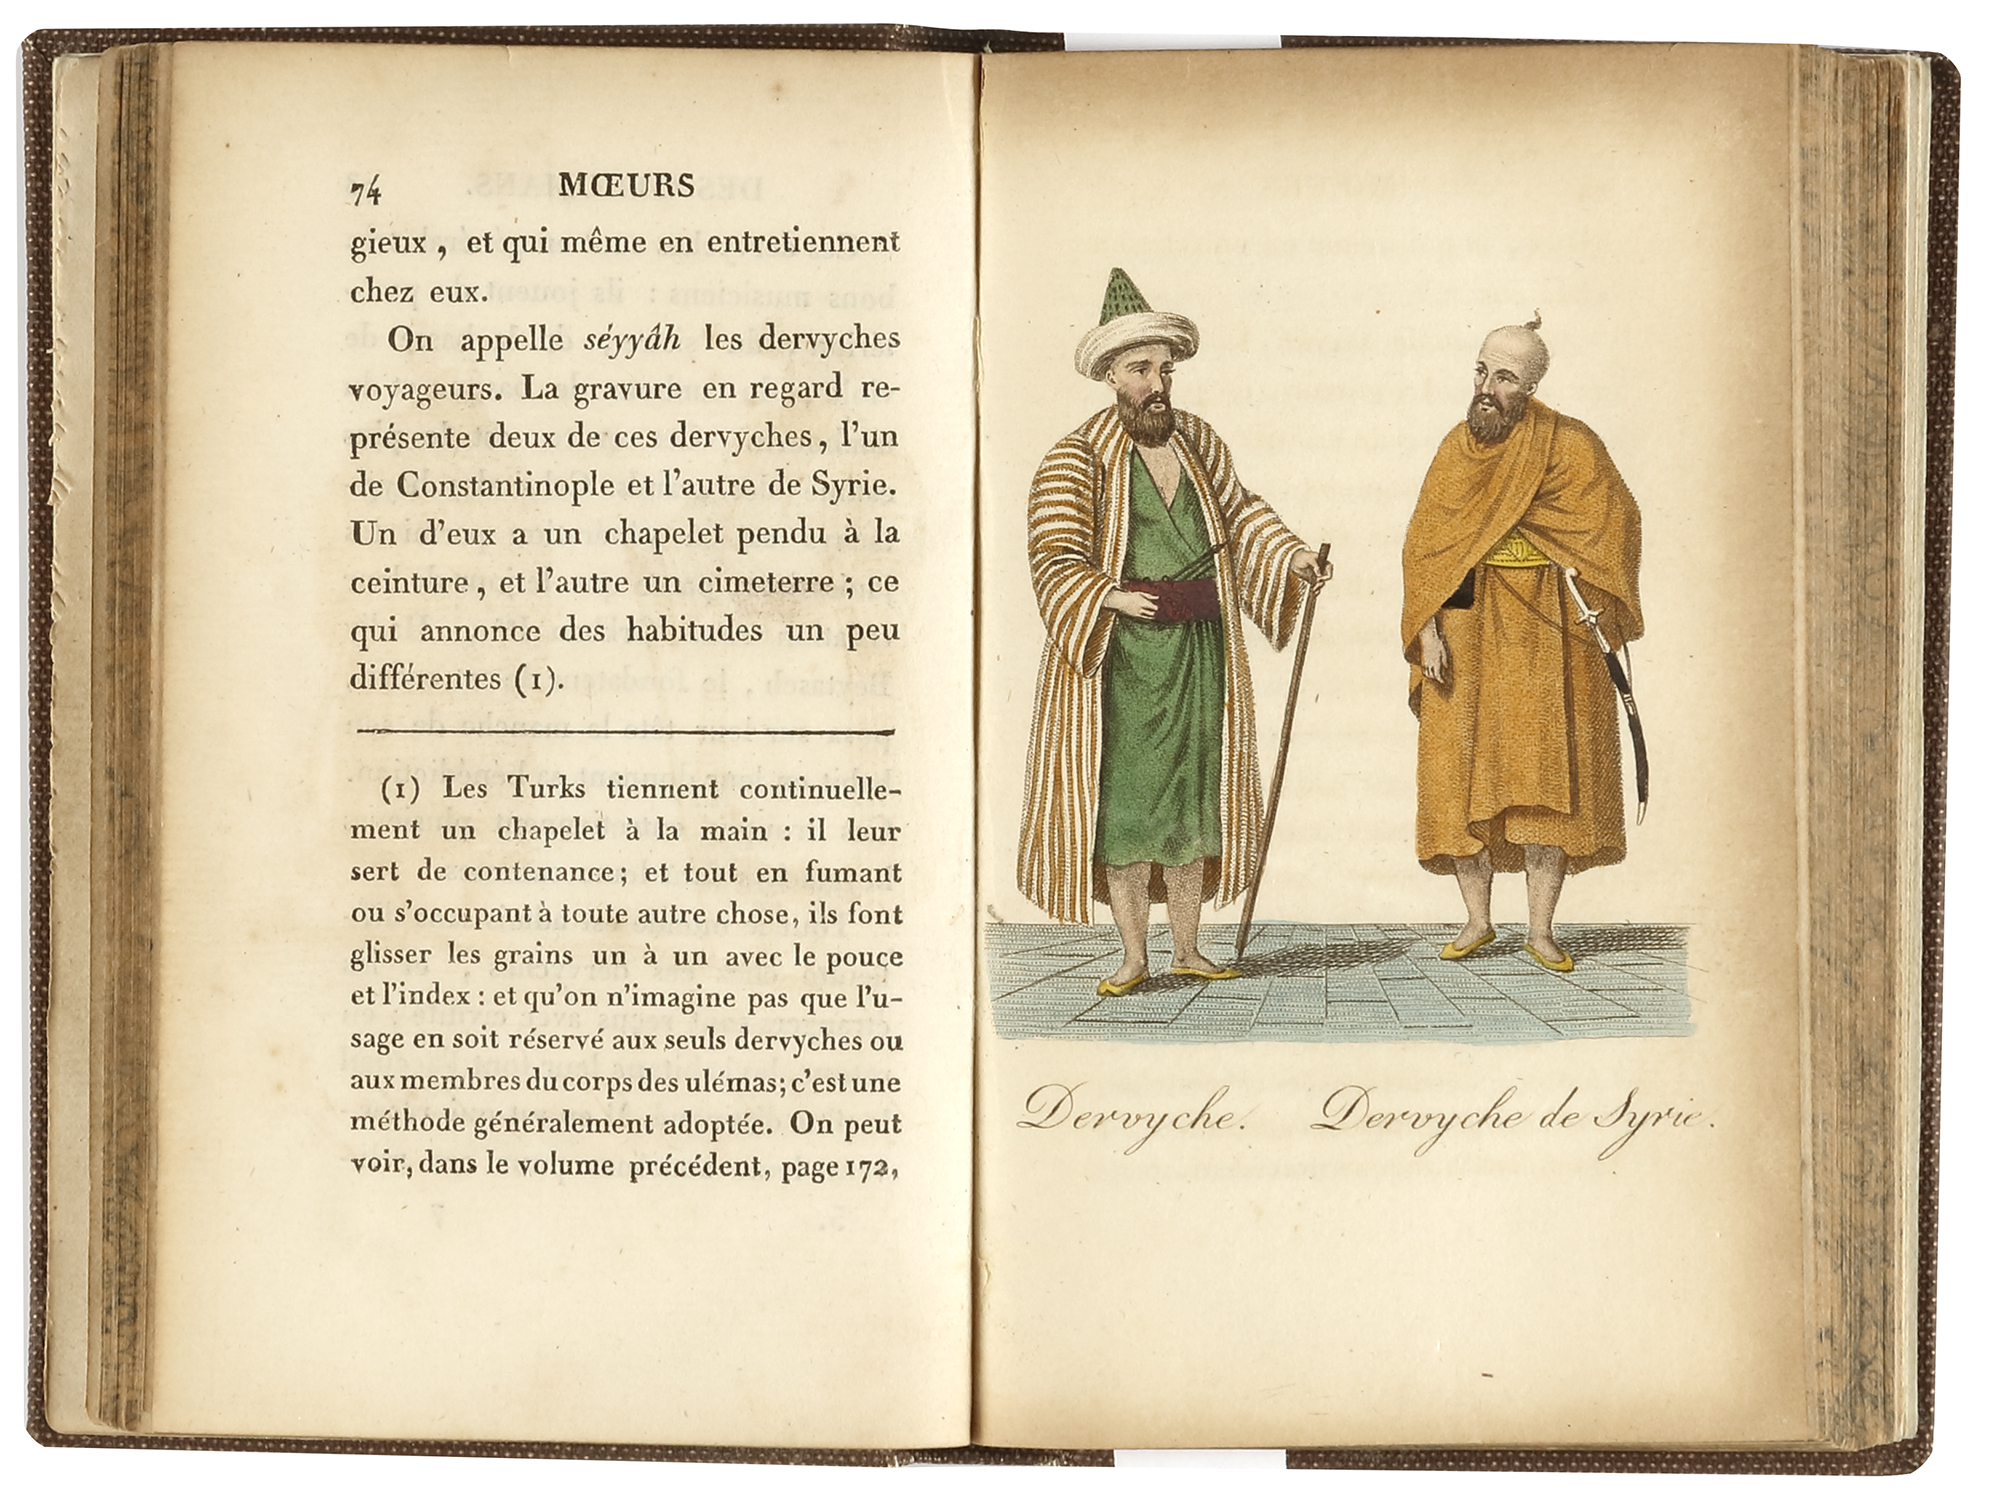 HISTORY OF THE OTTOMAN MANNERS AND CUSTOMS, PARIS AND DATED 1812 - Image 3 of 6